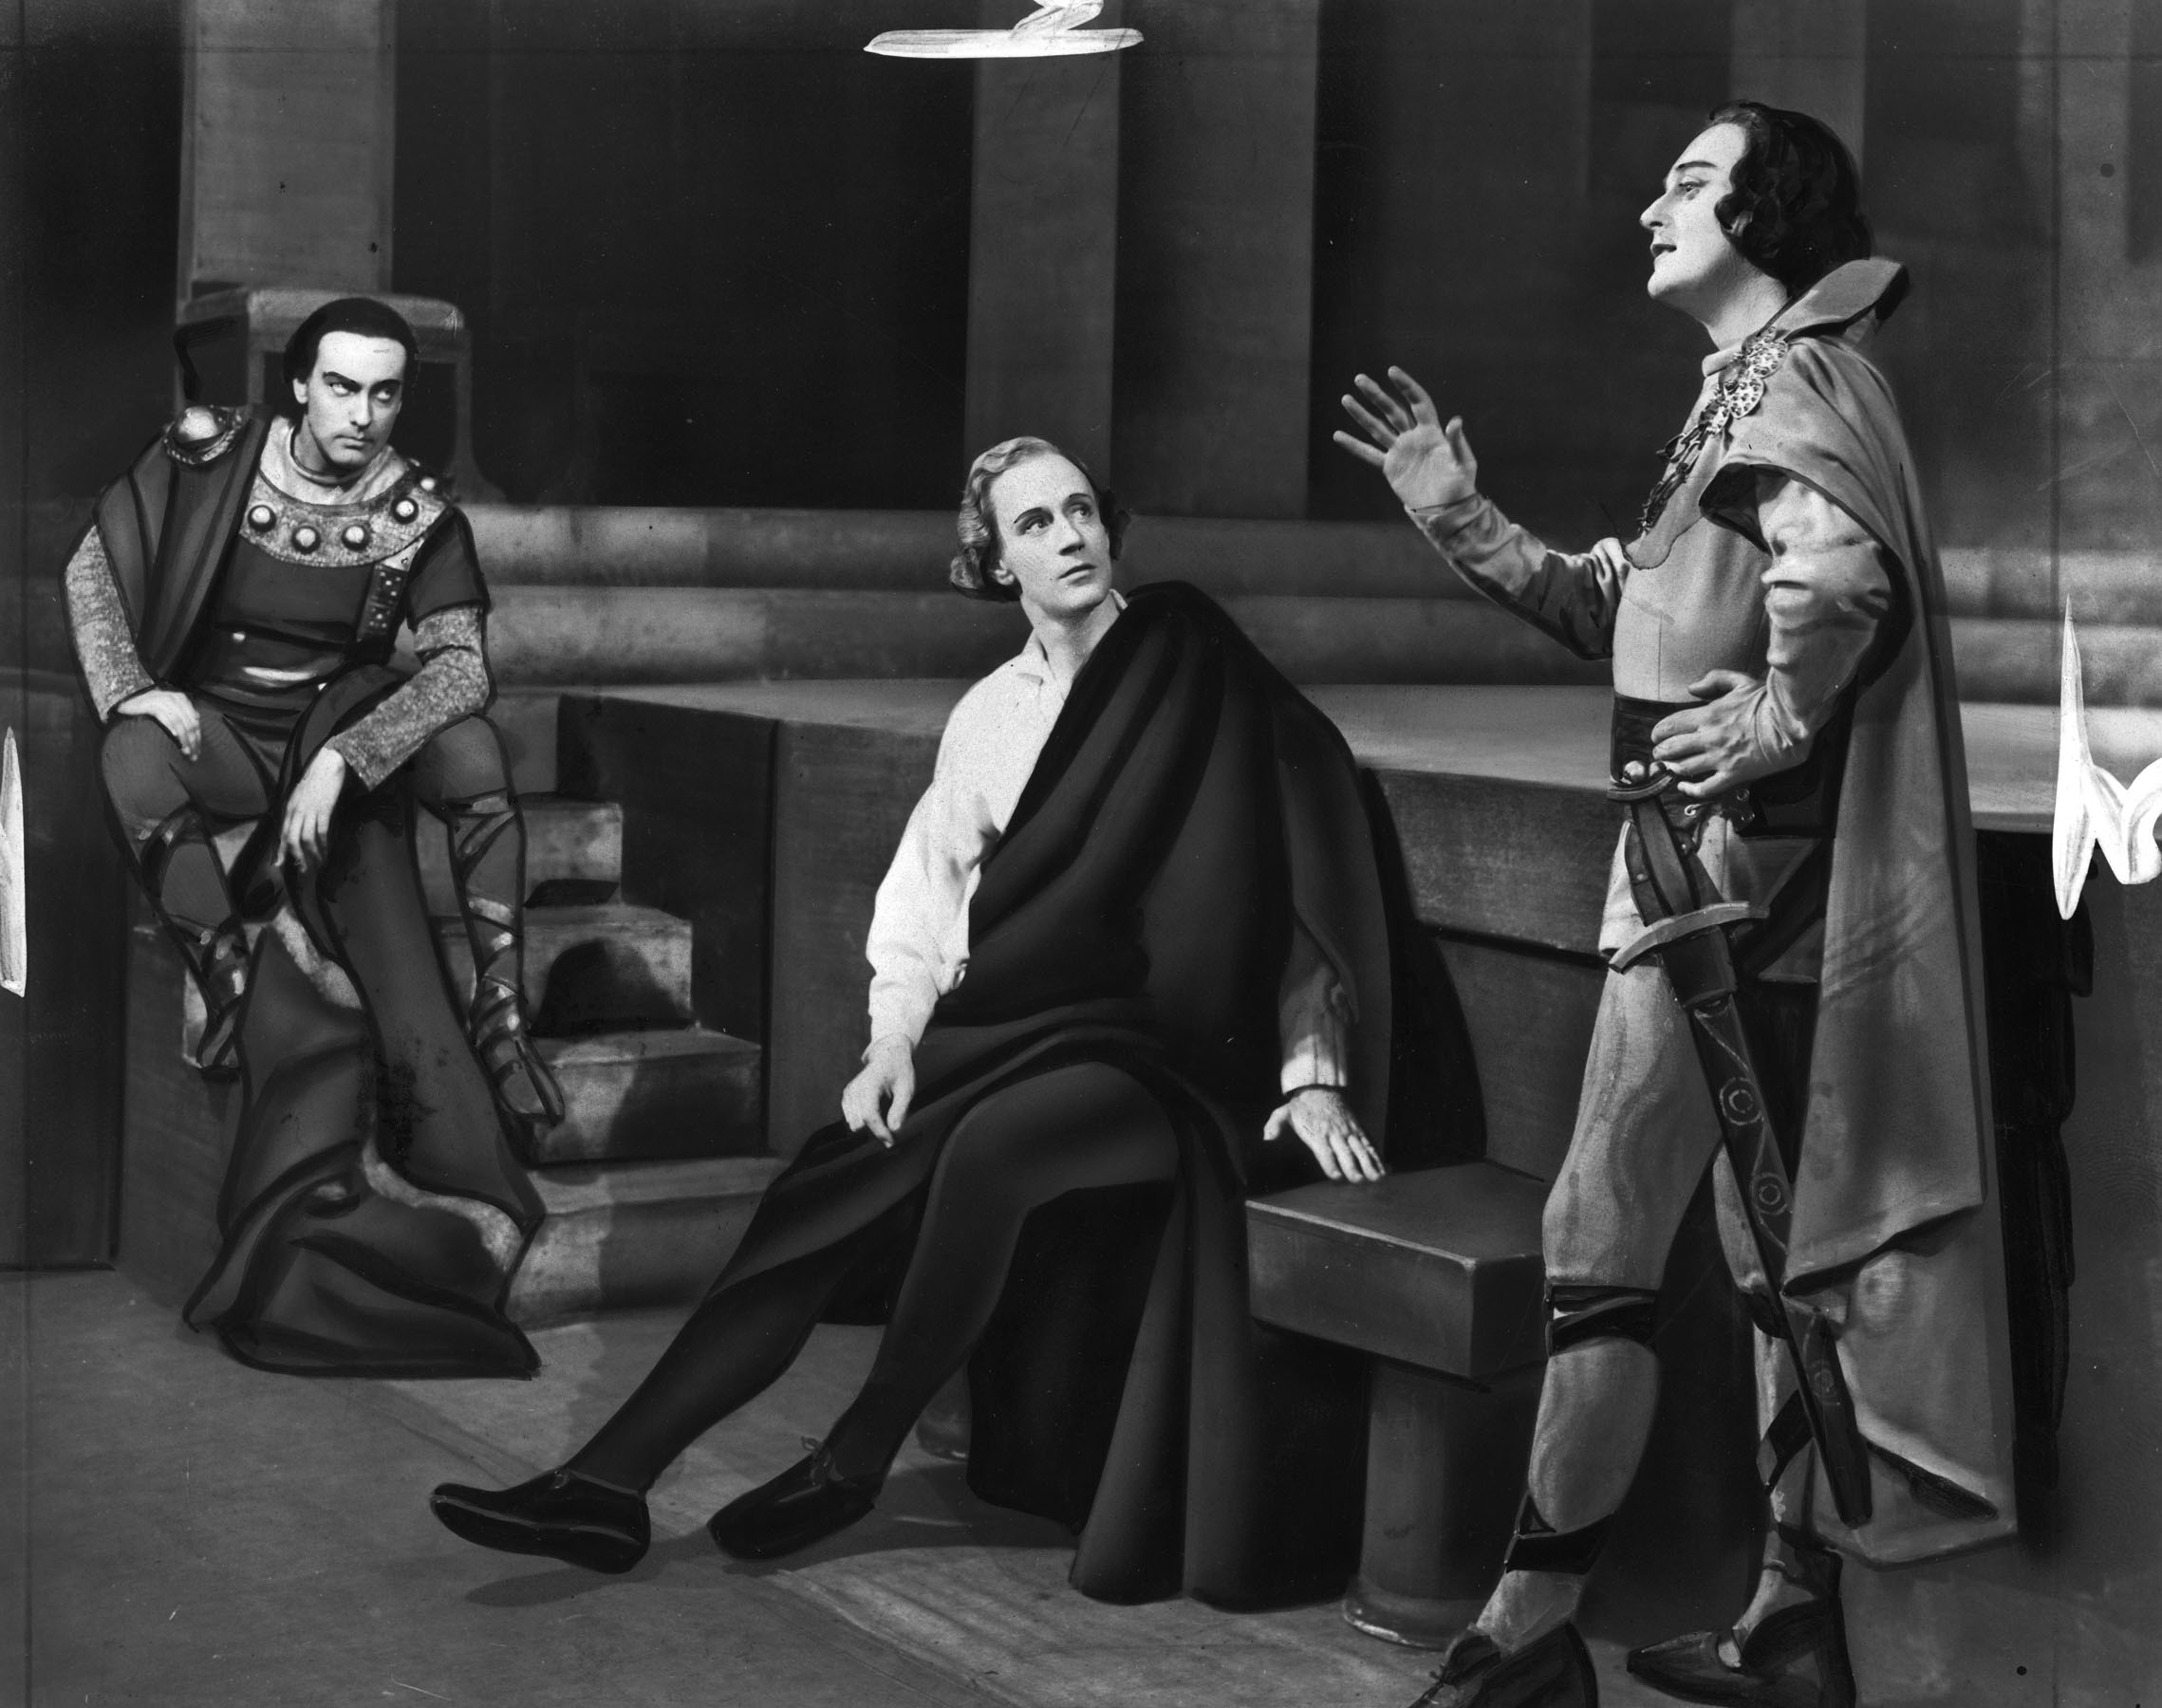 Original caption reads: "Joseph Holland (Horatio), Leslie Howard (Hamlet), and Albert Carroll (Osric) in “Hamlet”, opening at the Imperial Theatre on November 10th."